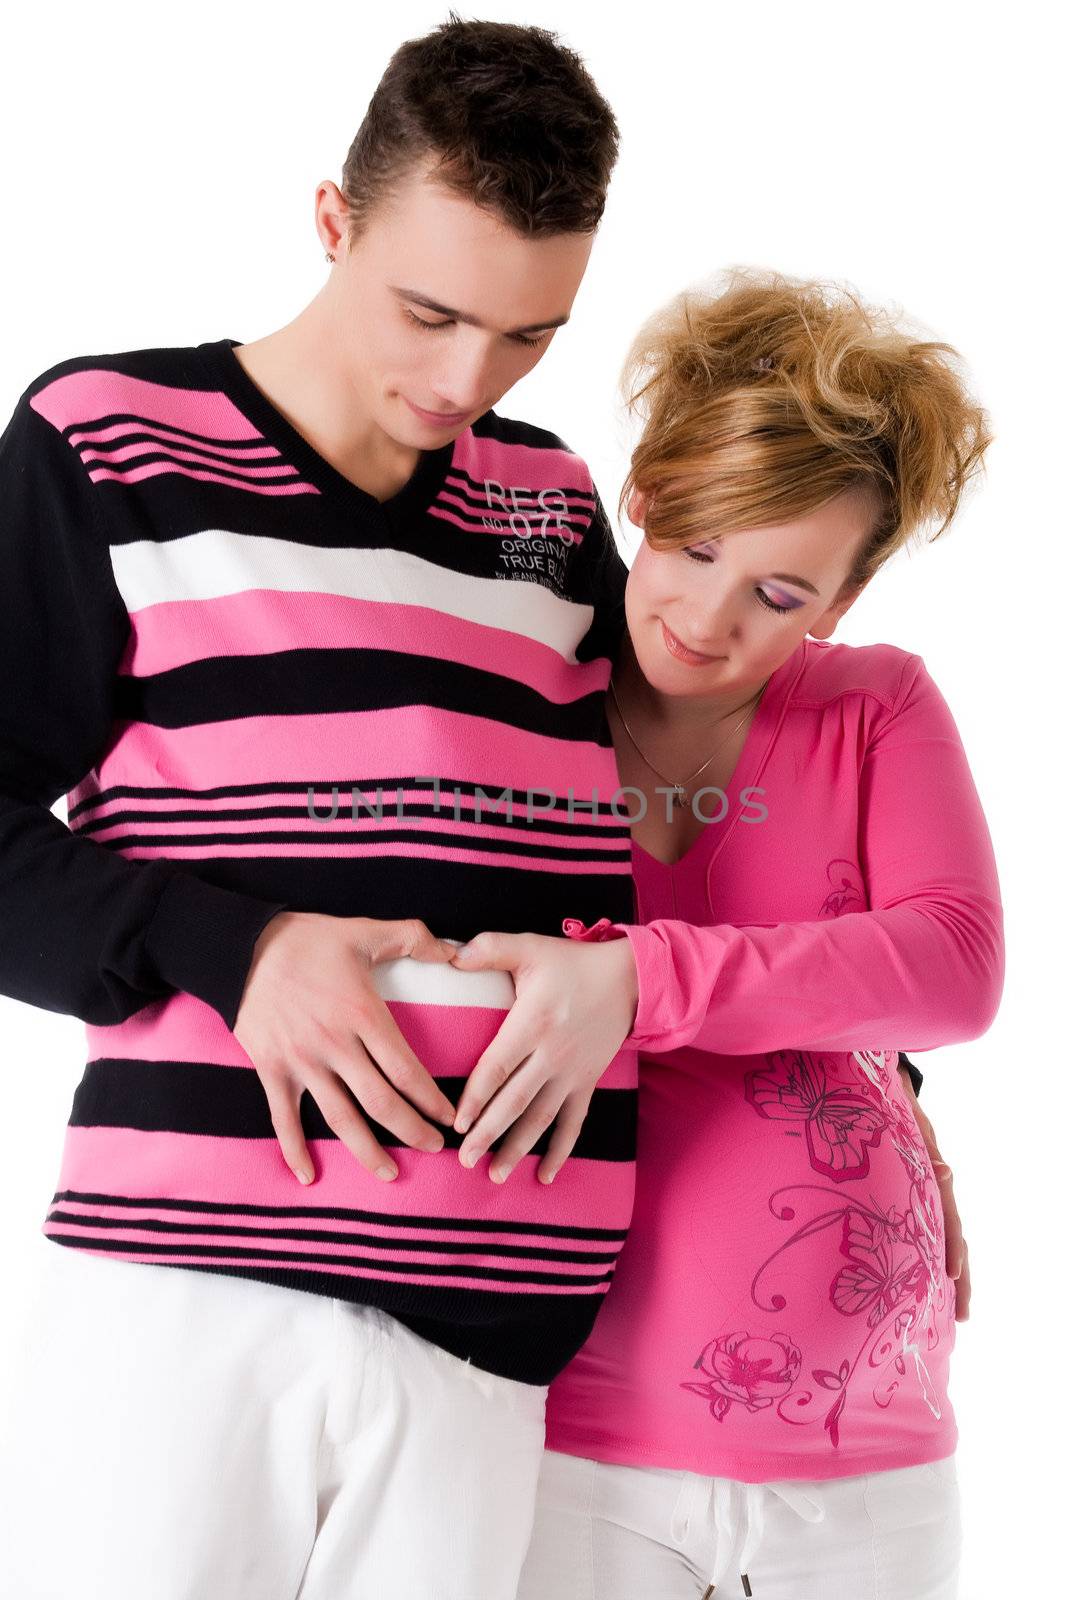 Help my man is pregnant by DNFStyle